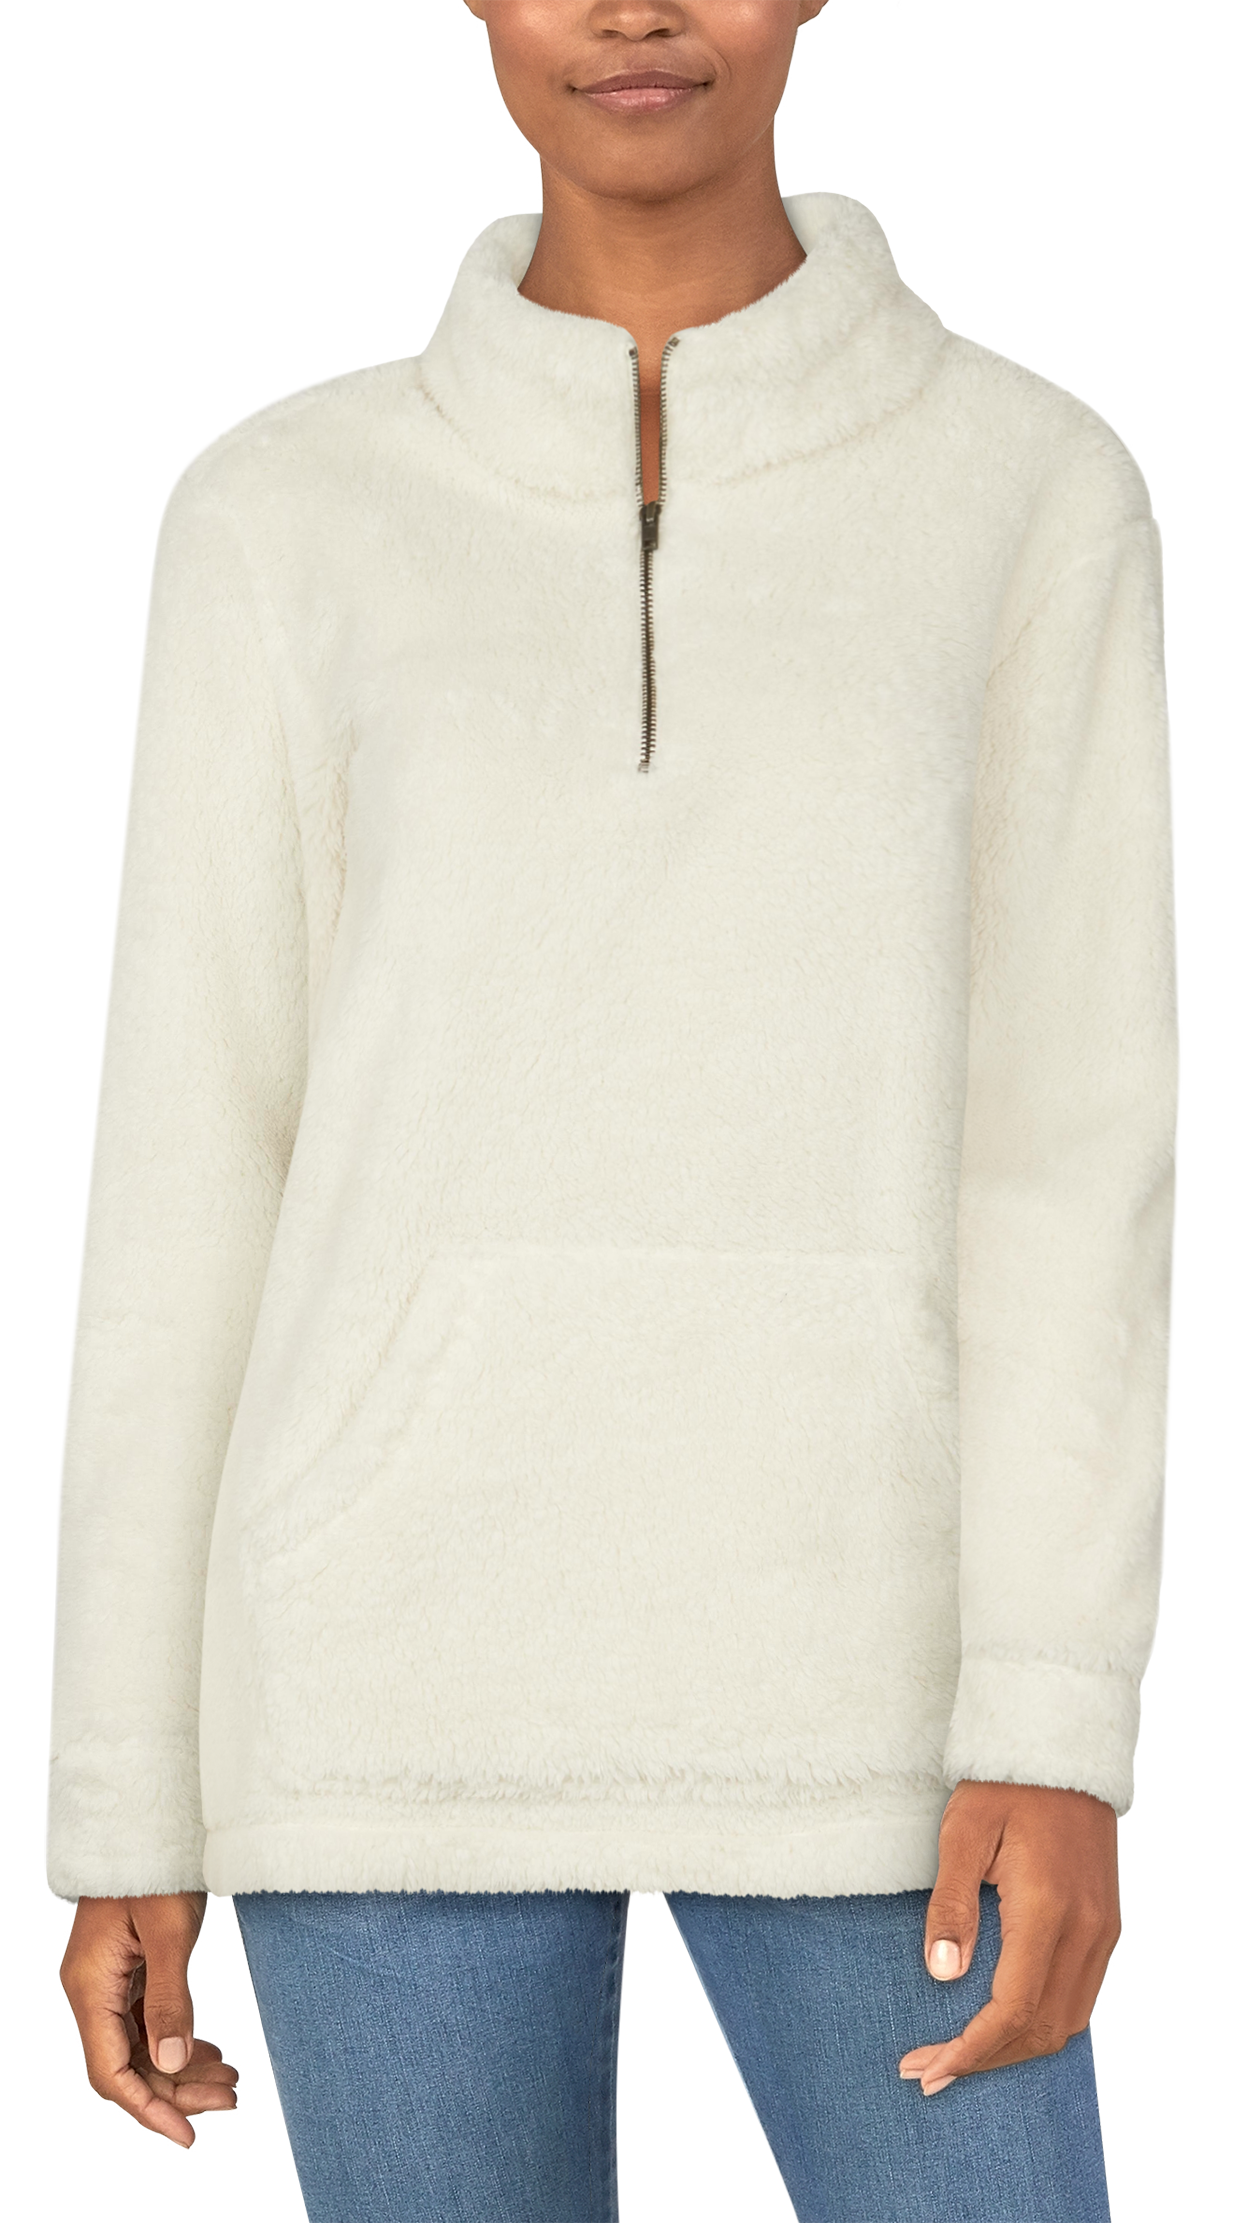 Natural Reflections Sherpa Quarter-Zip Long-Sleeve Pullover for Ladies - Birch - L product image